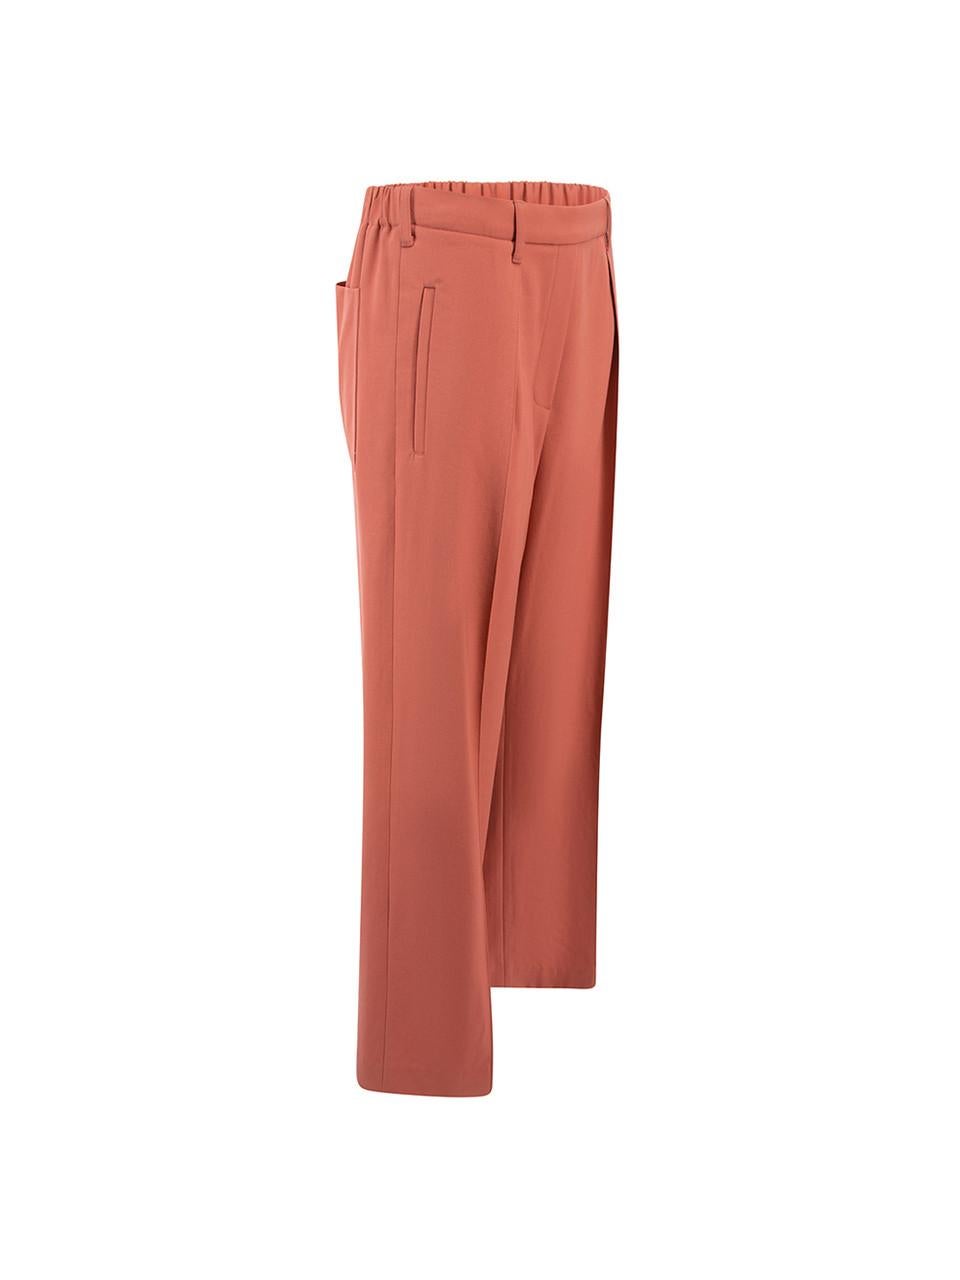 CONDITION is Very good. Hardly any visible wear to trousers is evident on this used Hermès designer resale item. Details Pink Wool Wide leg trousers High waisted Elasticated back waistband Front side pockets 1x Back patch pocket Belt hoops Made in